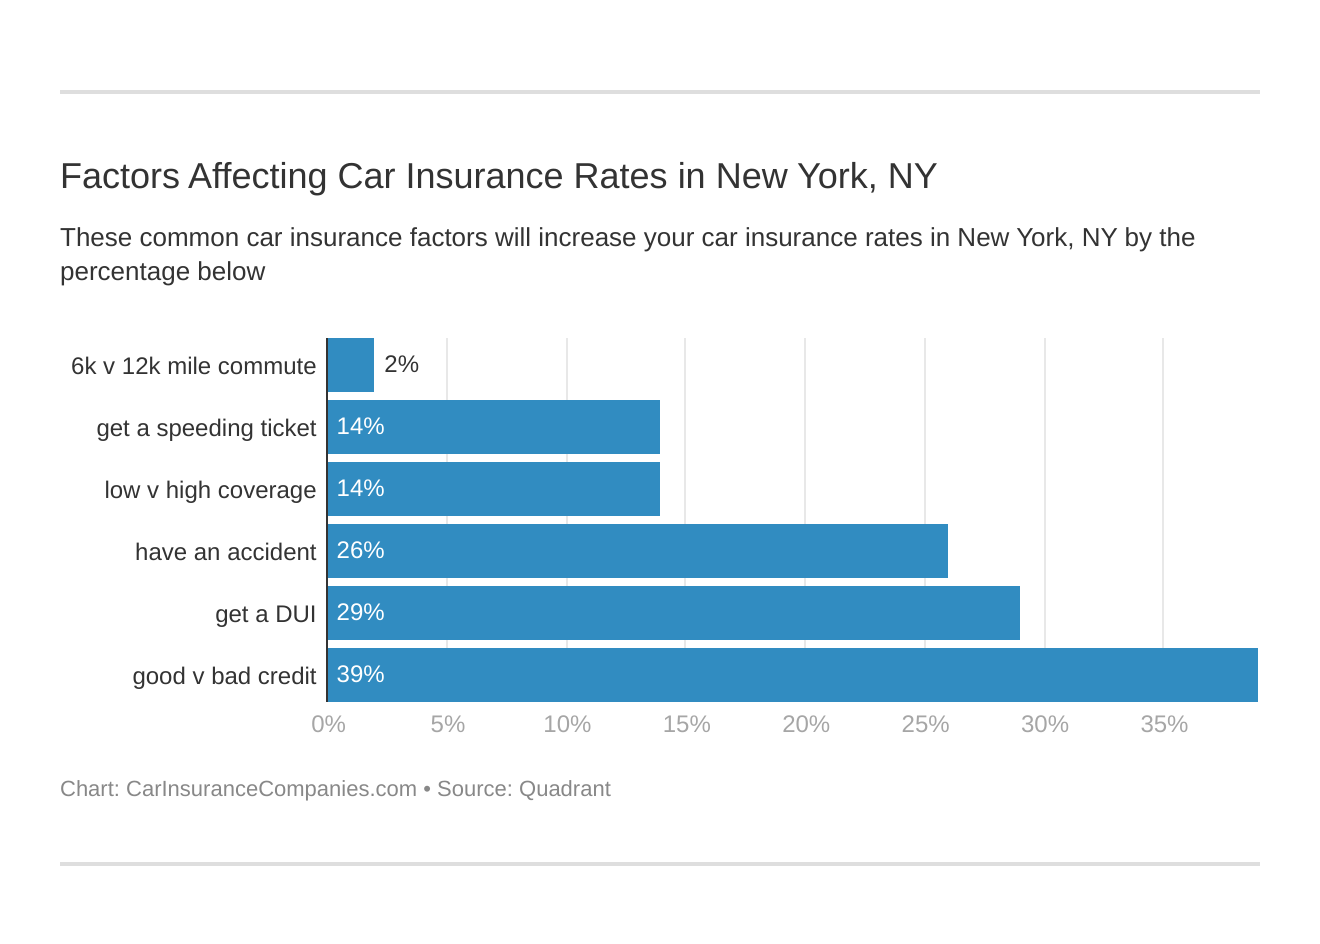 Factors Affecting Car Insurance Rates in New York, NY